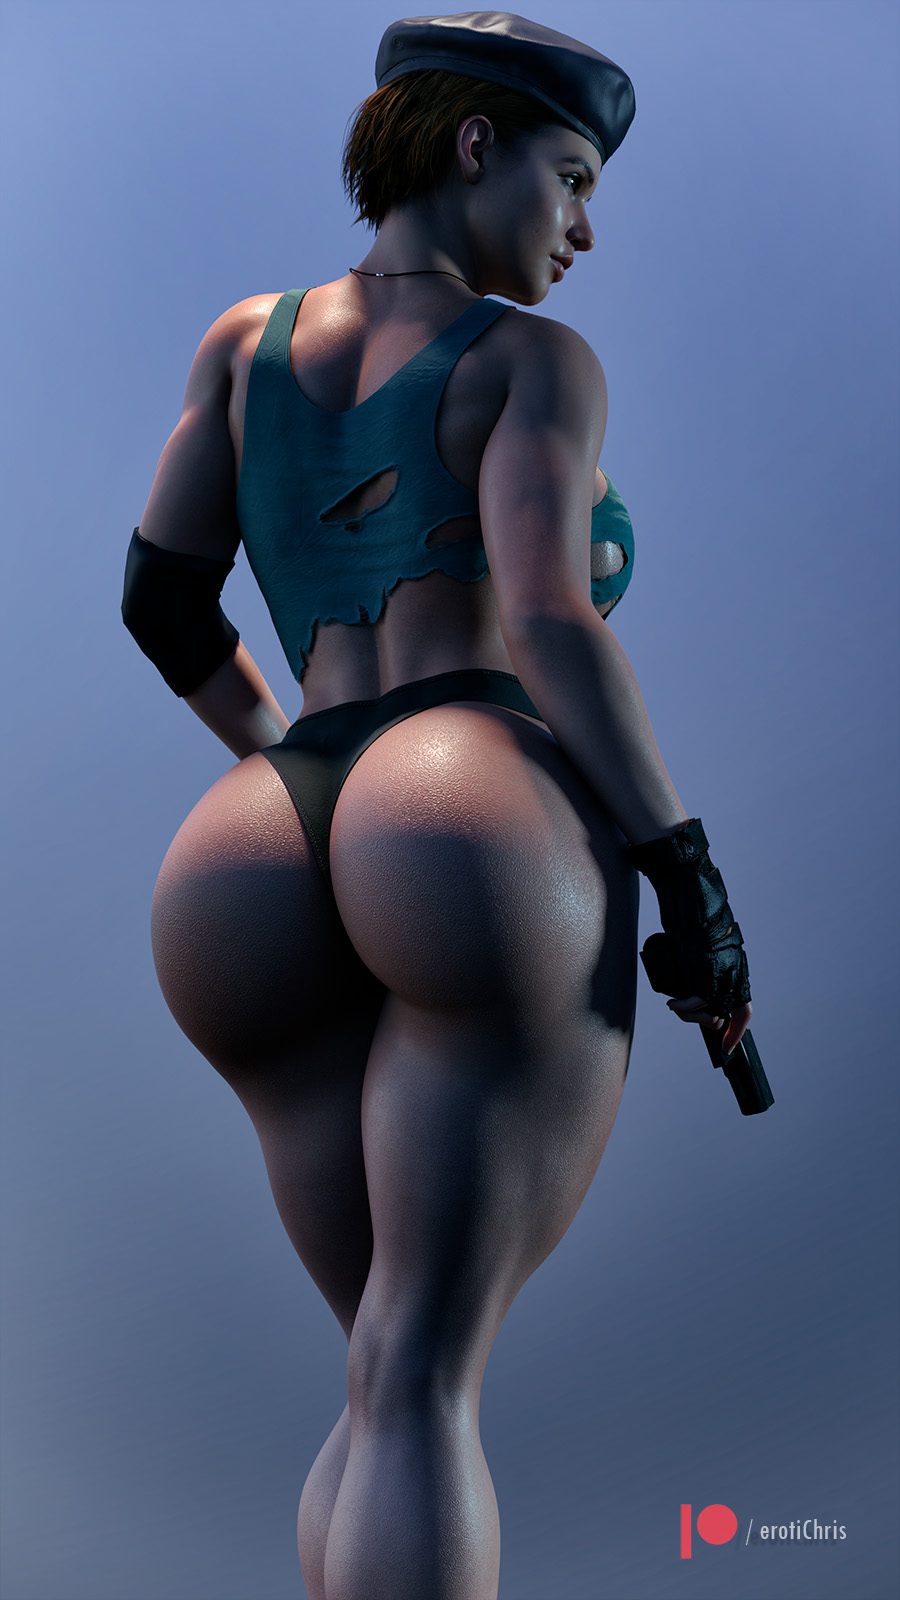 Resident Evil Porn Ass - Resident Evil Hentai Porn - Busty, Thick, Wide Hips, Bubble Ass, Thick Ass,  Pawg - Valorant Porn Gallery